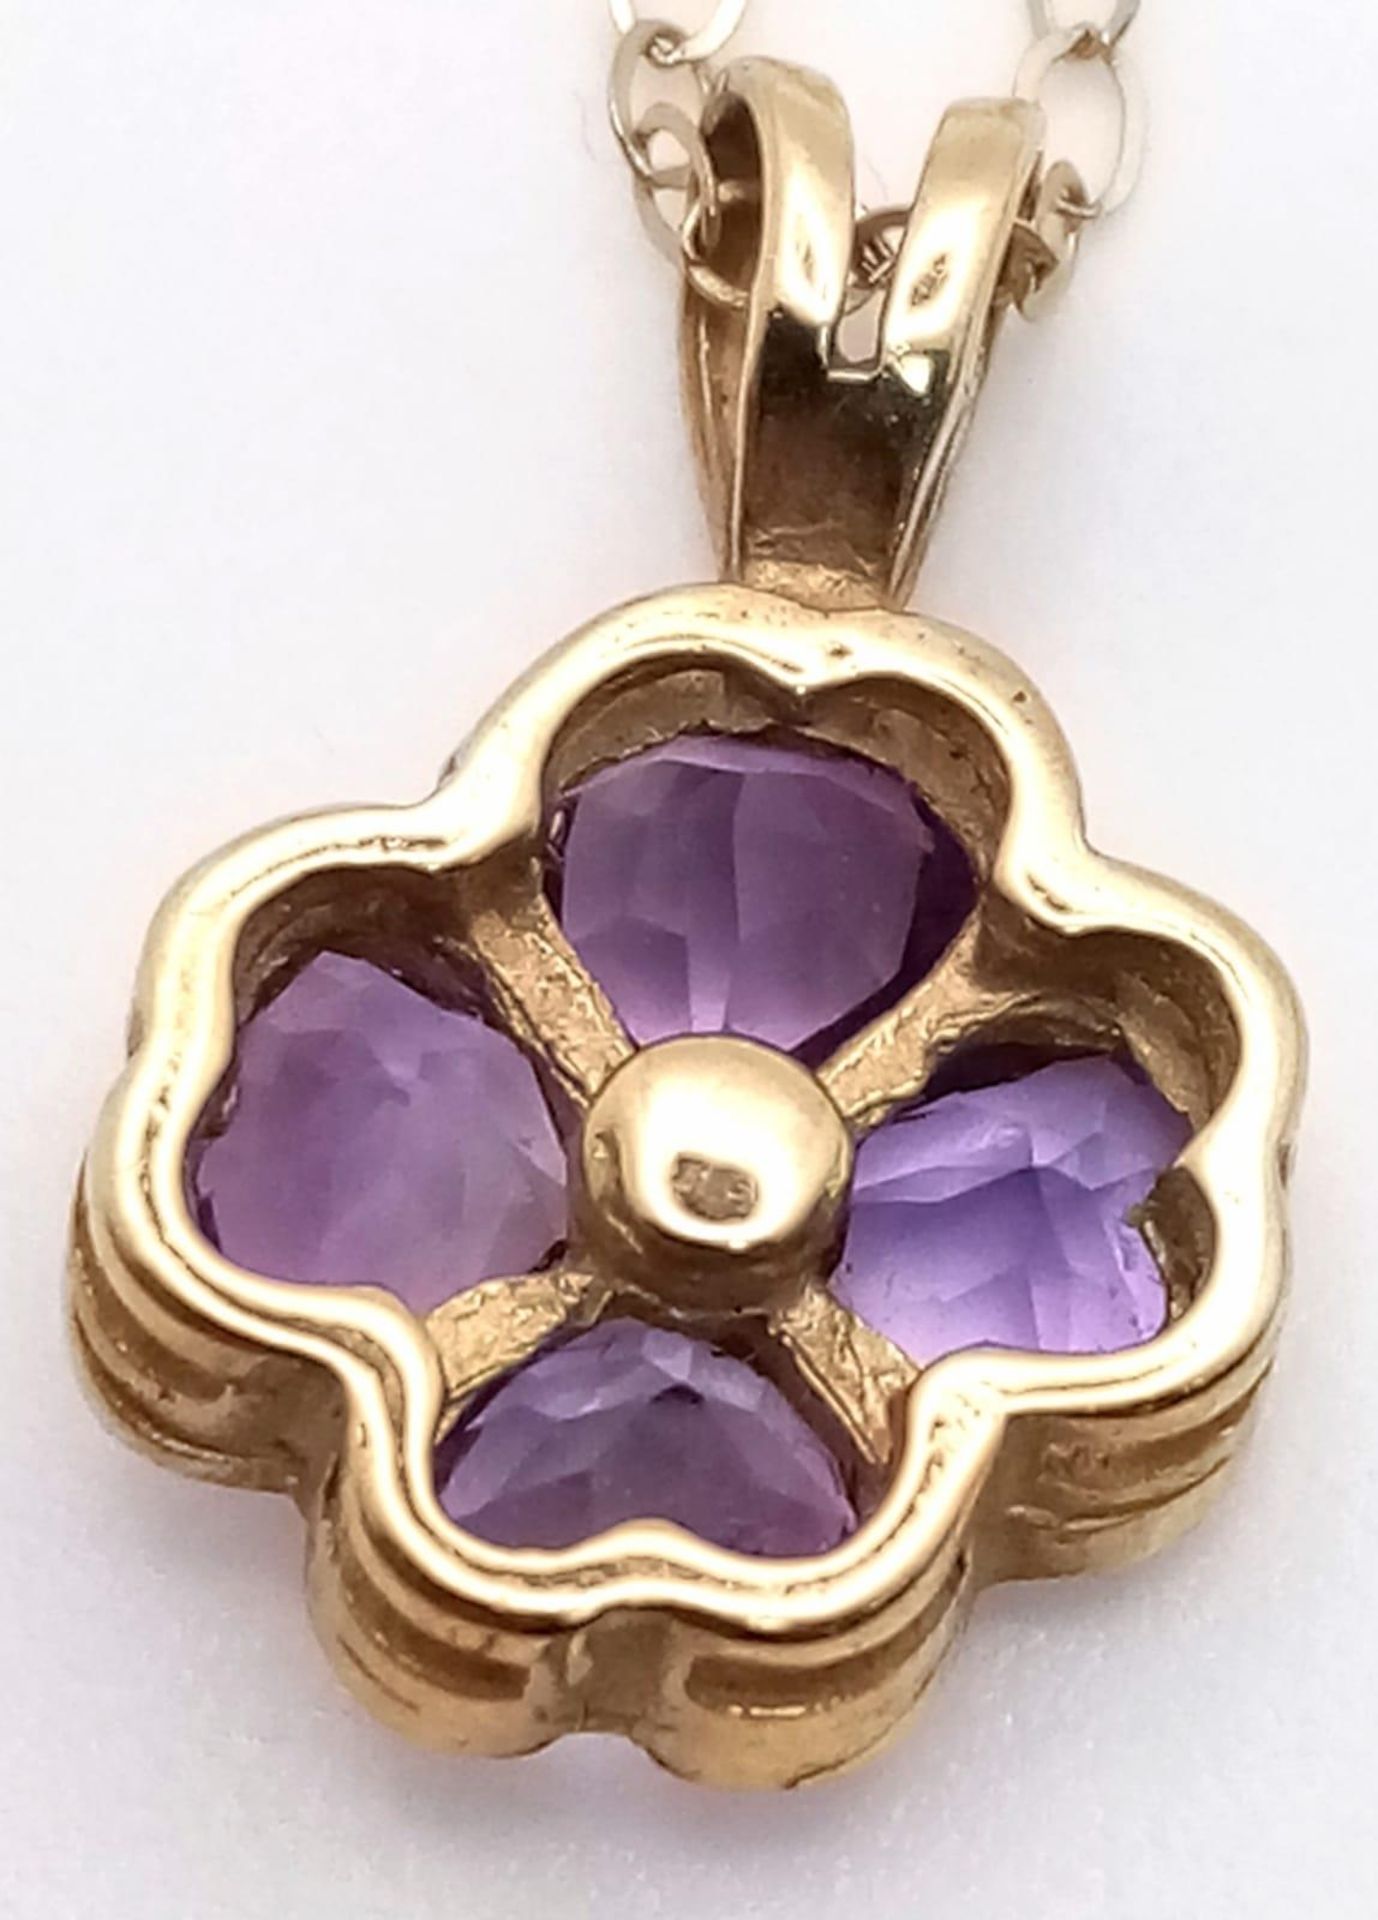 A pretty 9K Yellow Gold (tested as) Amethyst Flower pendant on Necklace, 1.3g total weight, 18” - Image 3 of 3